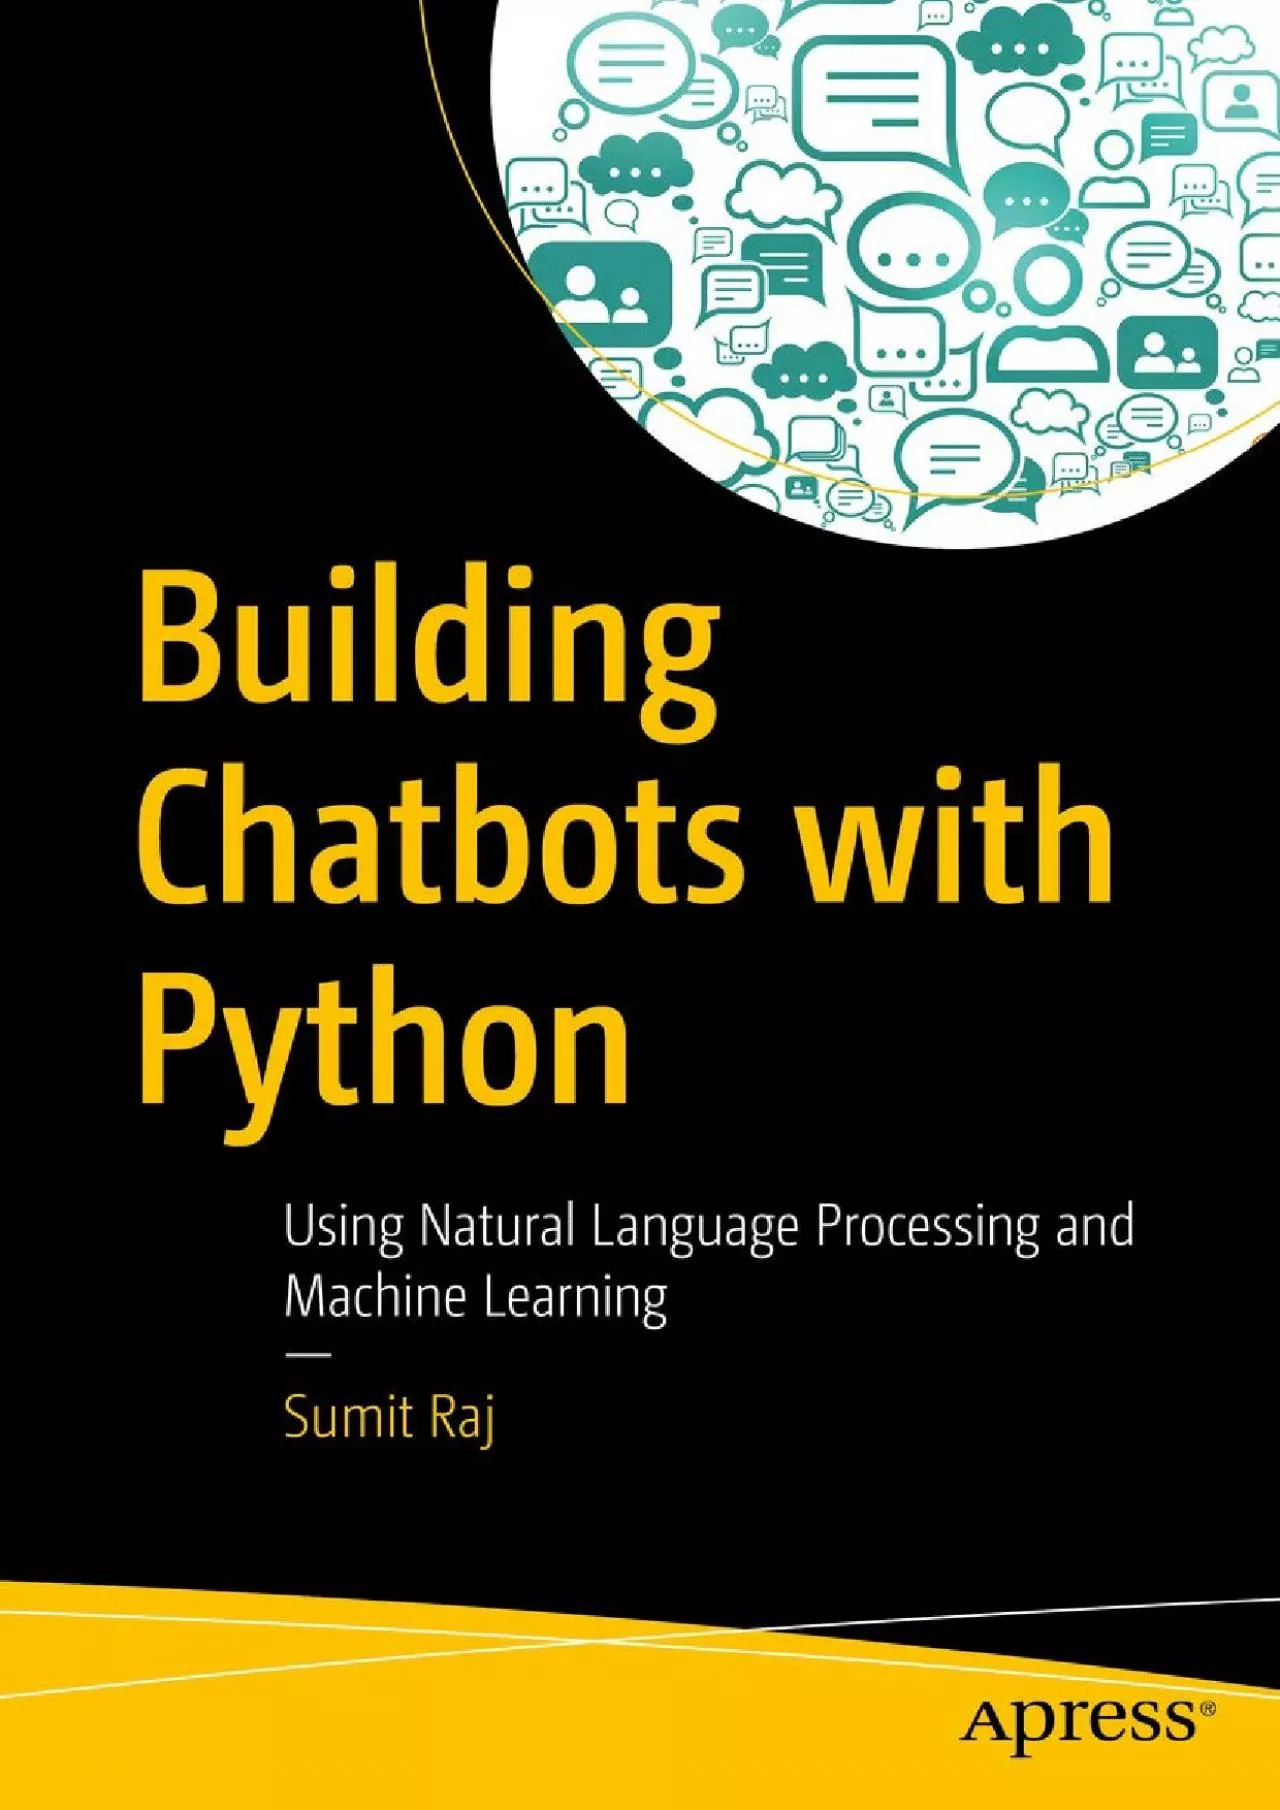 [DOWLOAD]-Building Chatbots with Python: Using Natural Language Processing and Machine